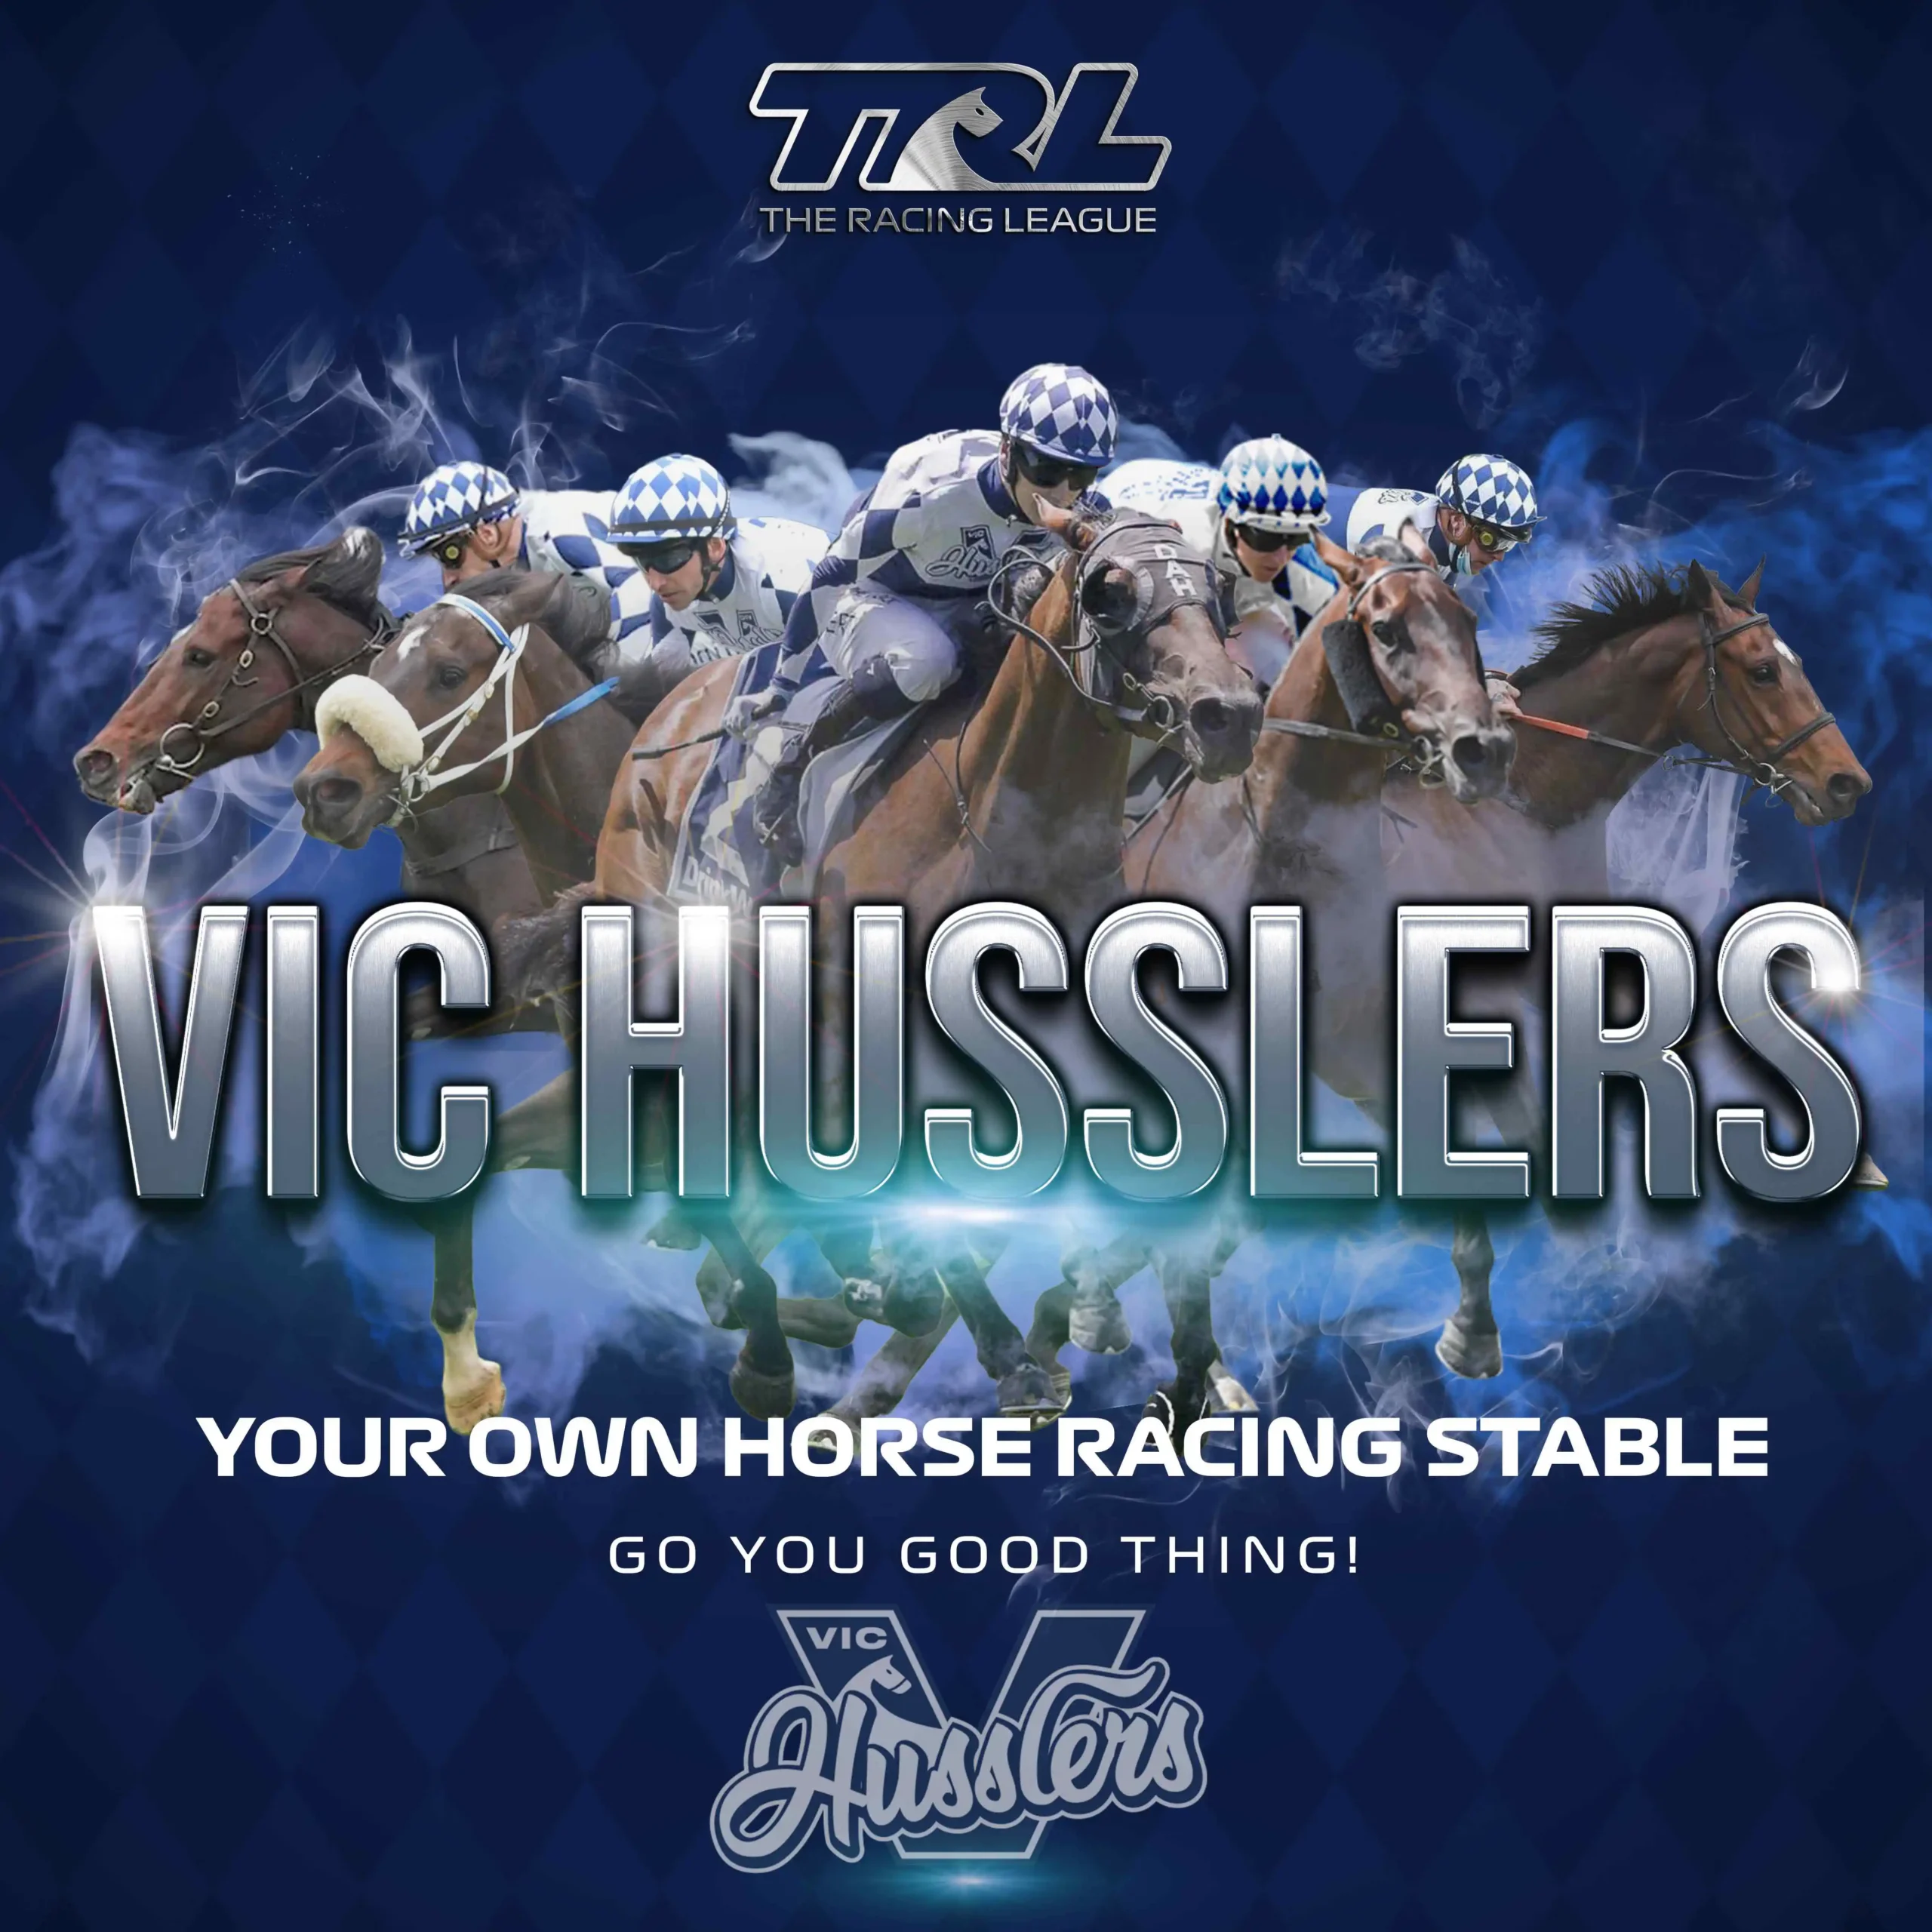 The Racing League VIC Husslers